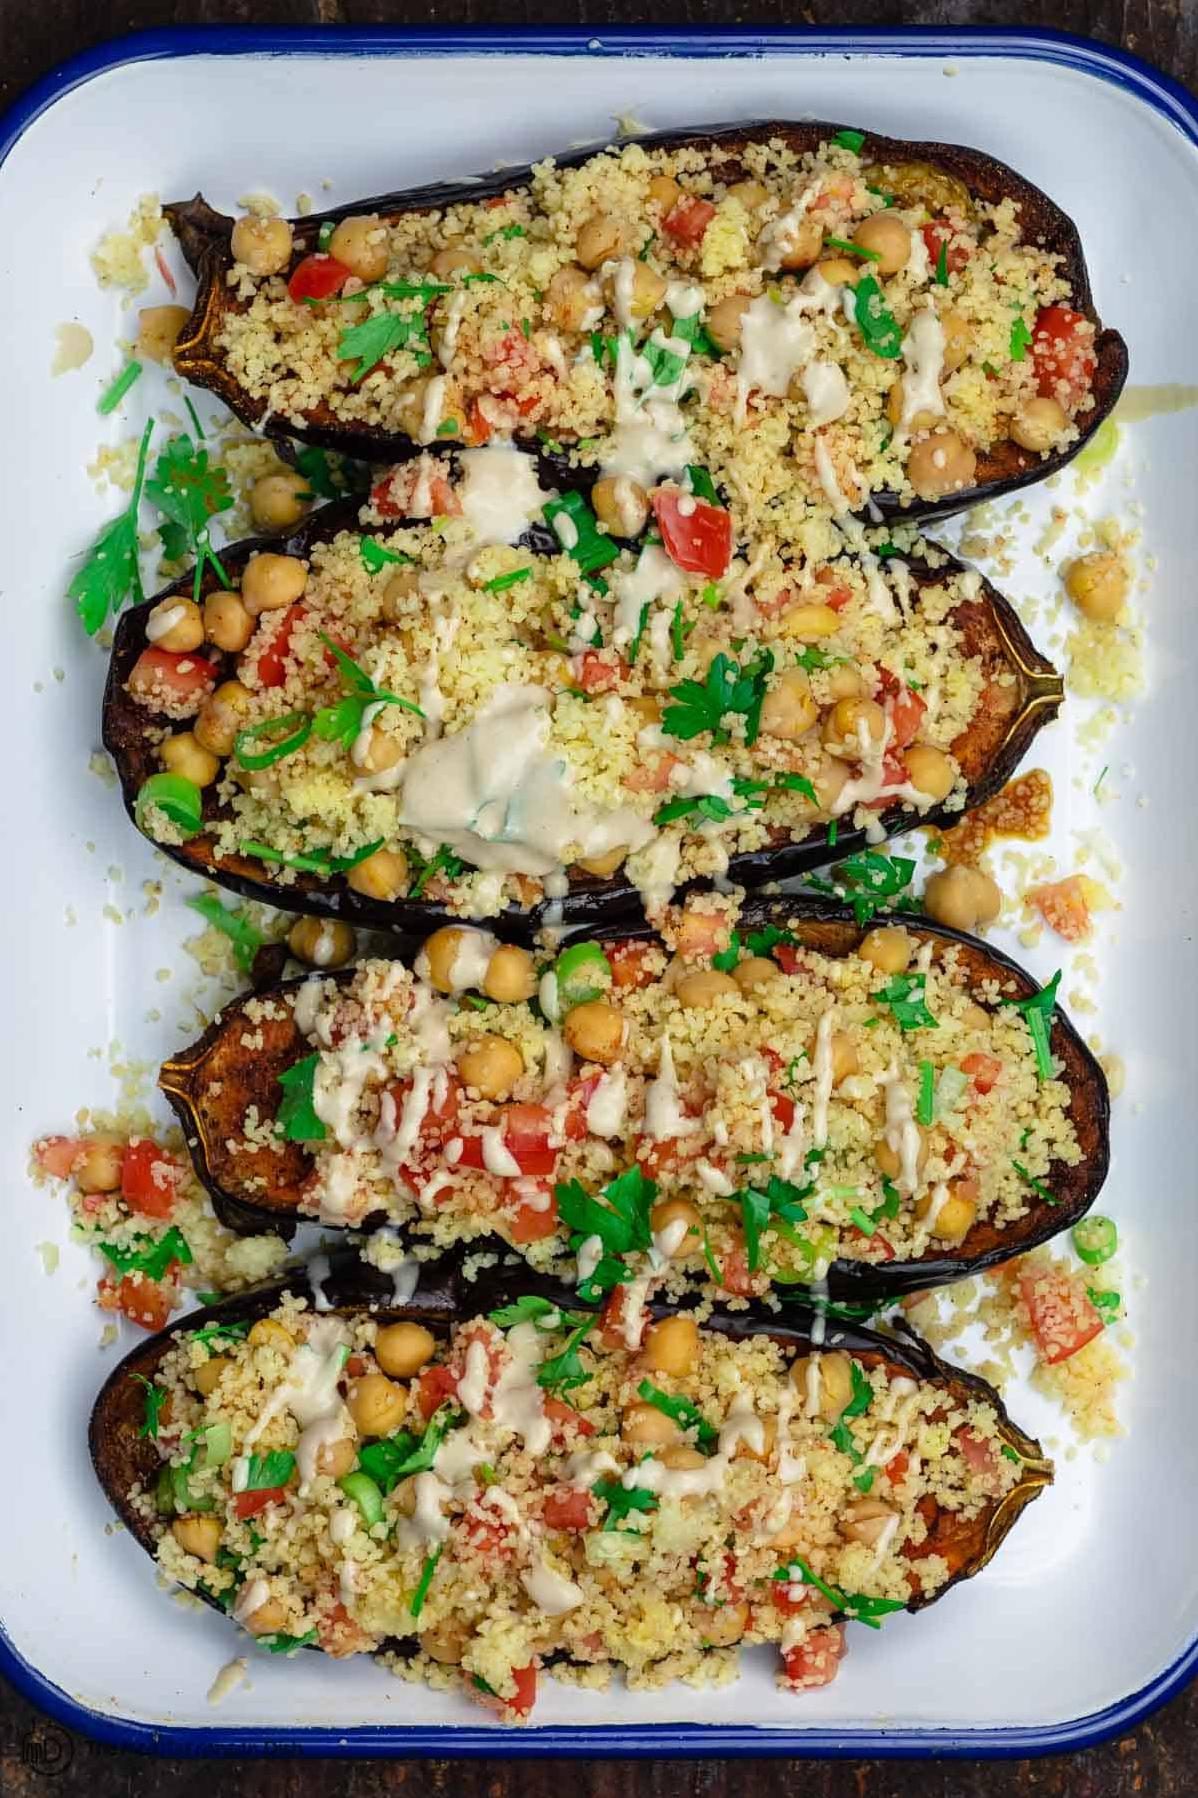  Get ready for a savory adventure with this Vegetarian Stuffed Eggplant recipe!